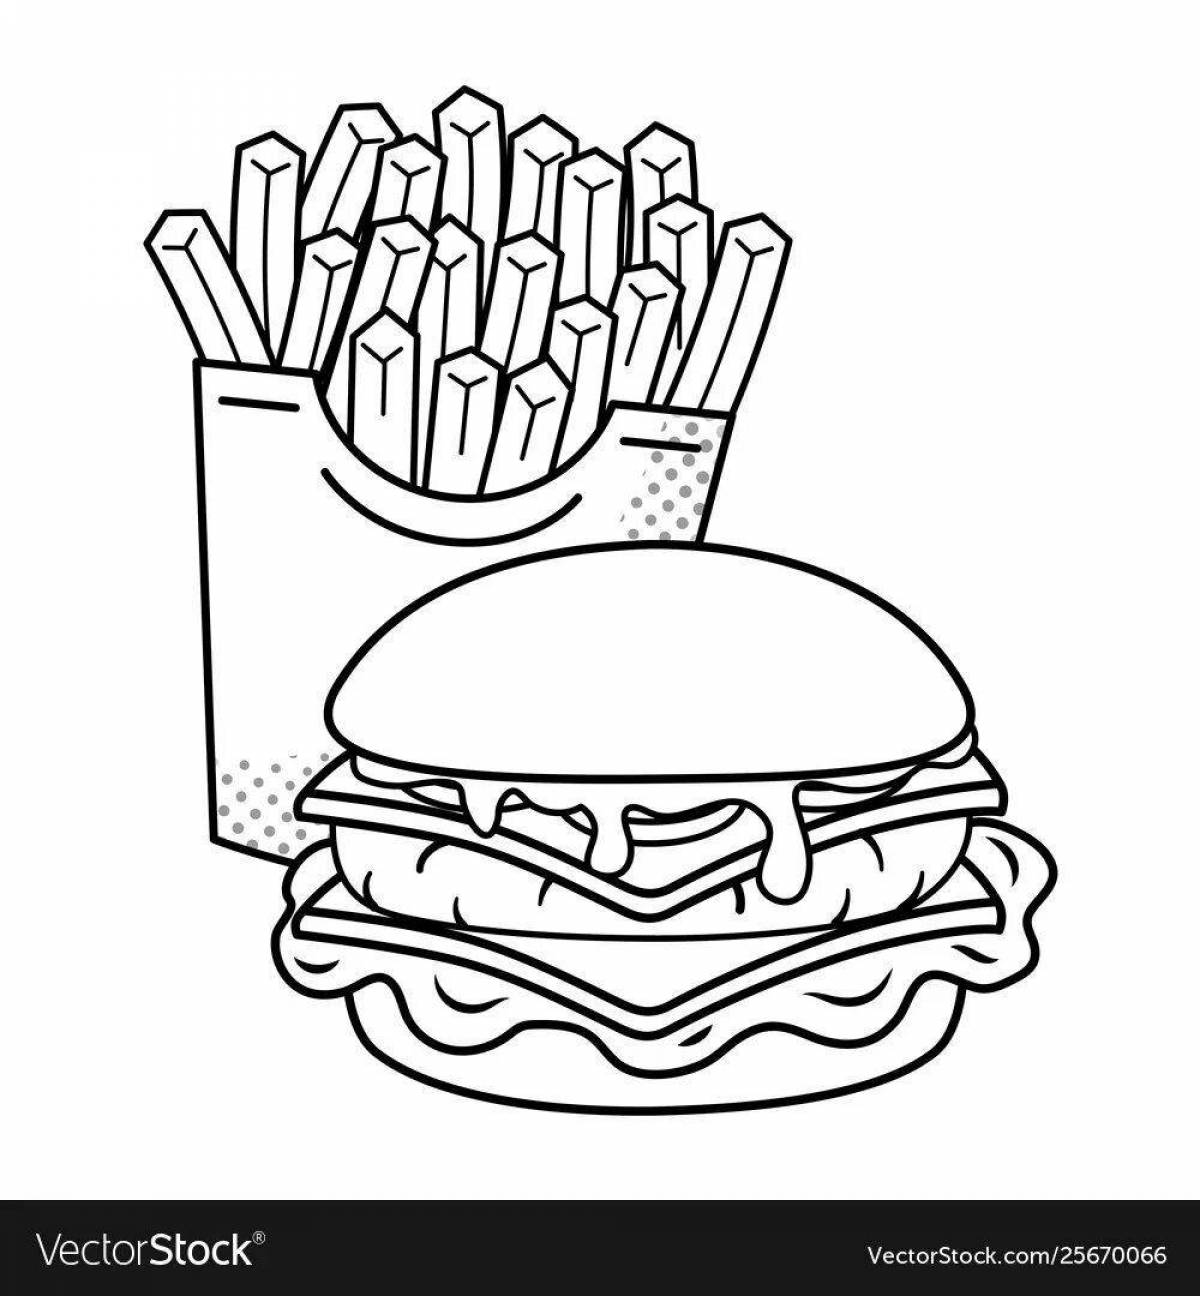 Delightful burger king coloring page